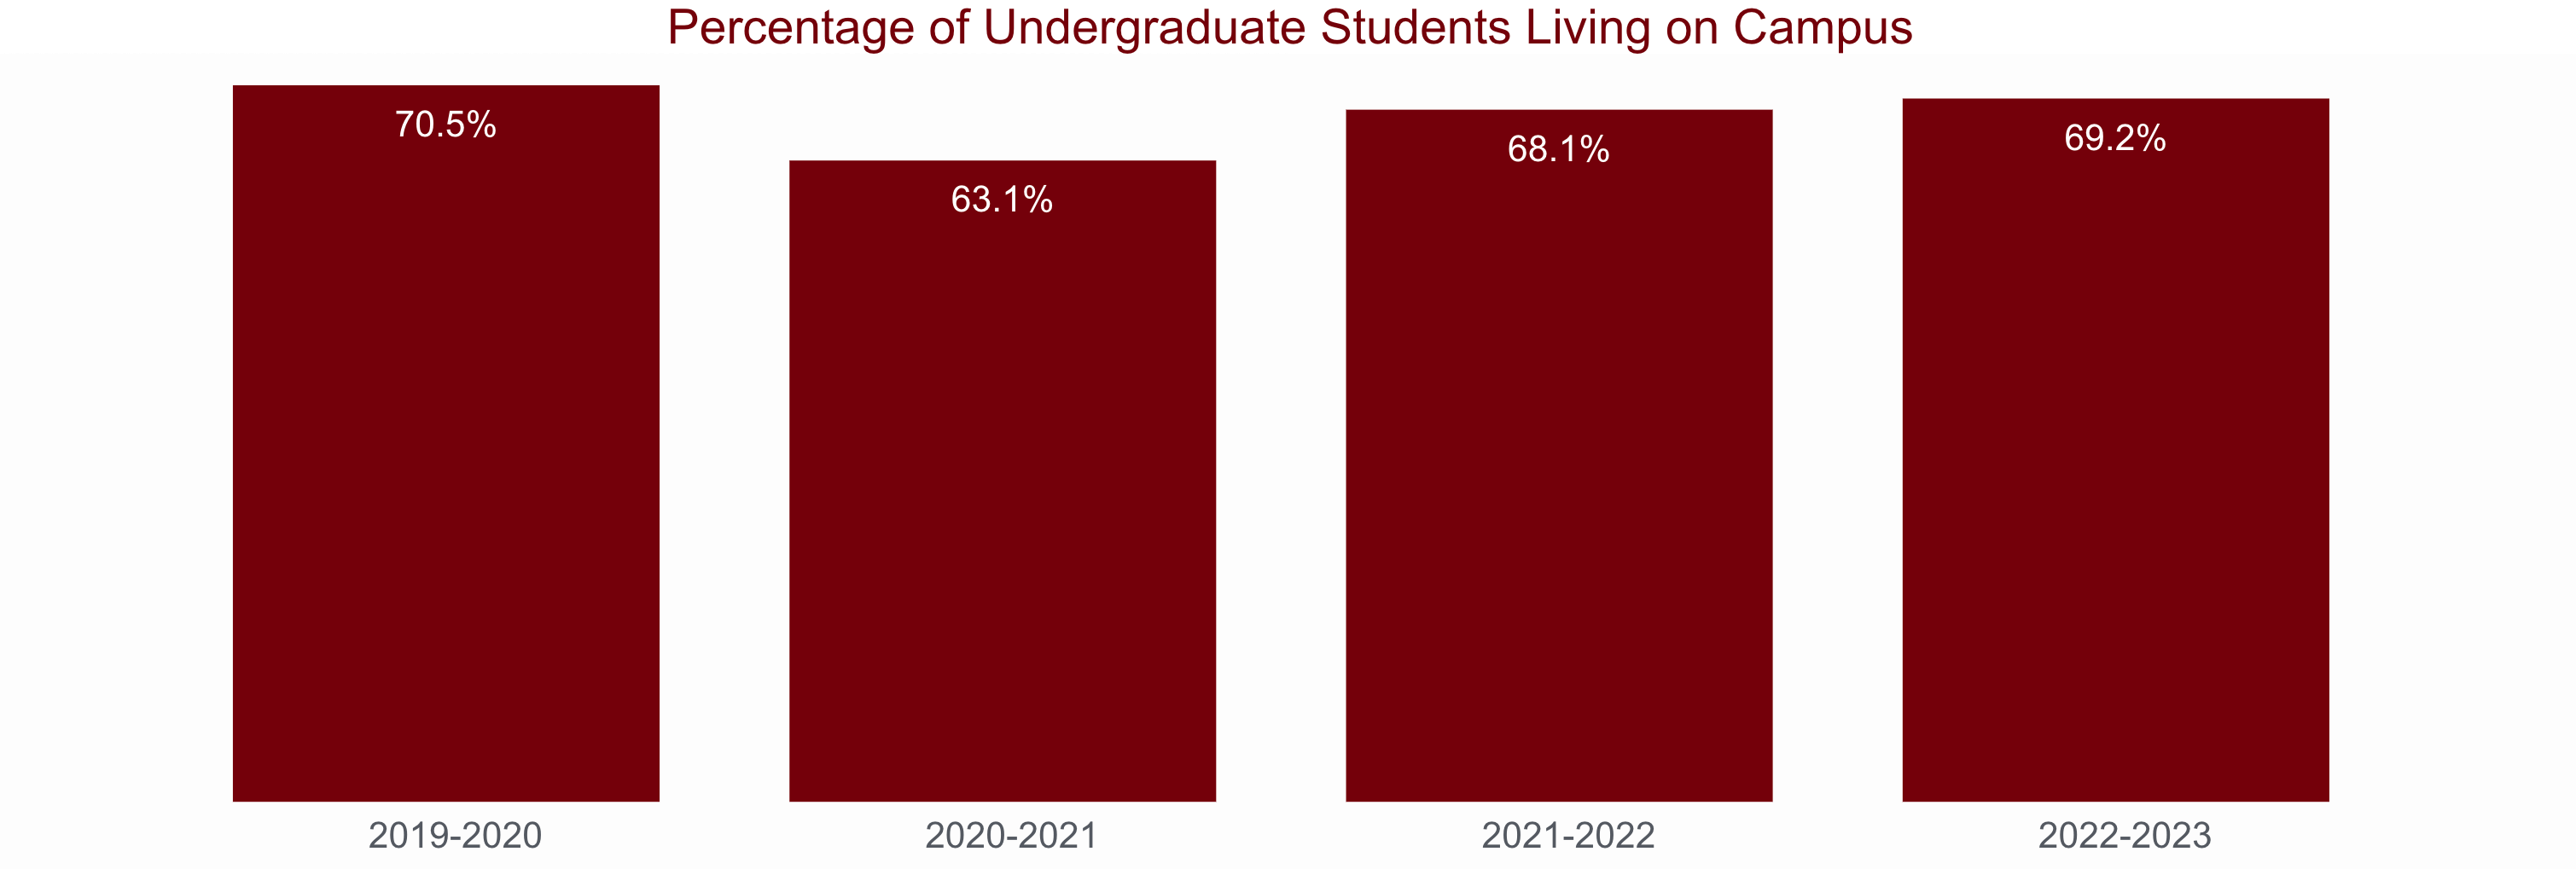 Bar chart showing the percentage of undergraduate students living on campus